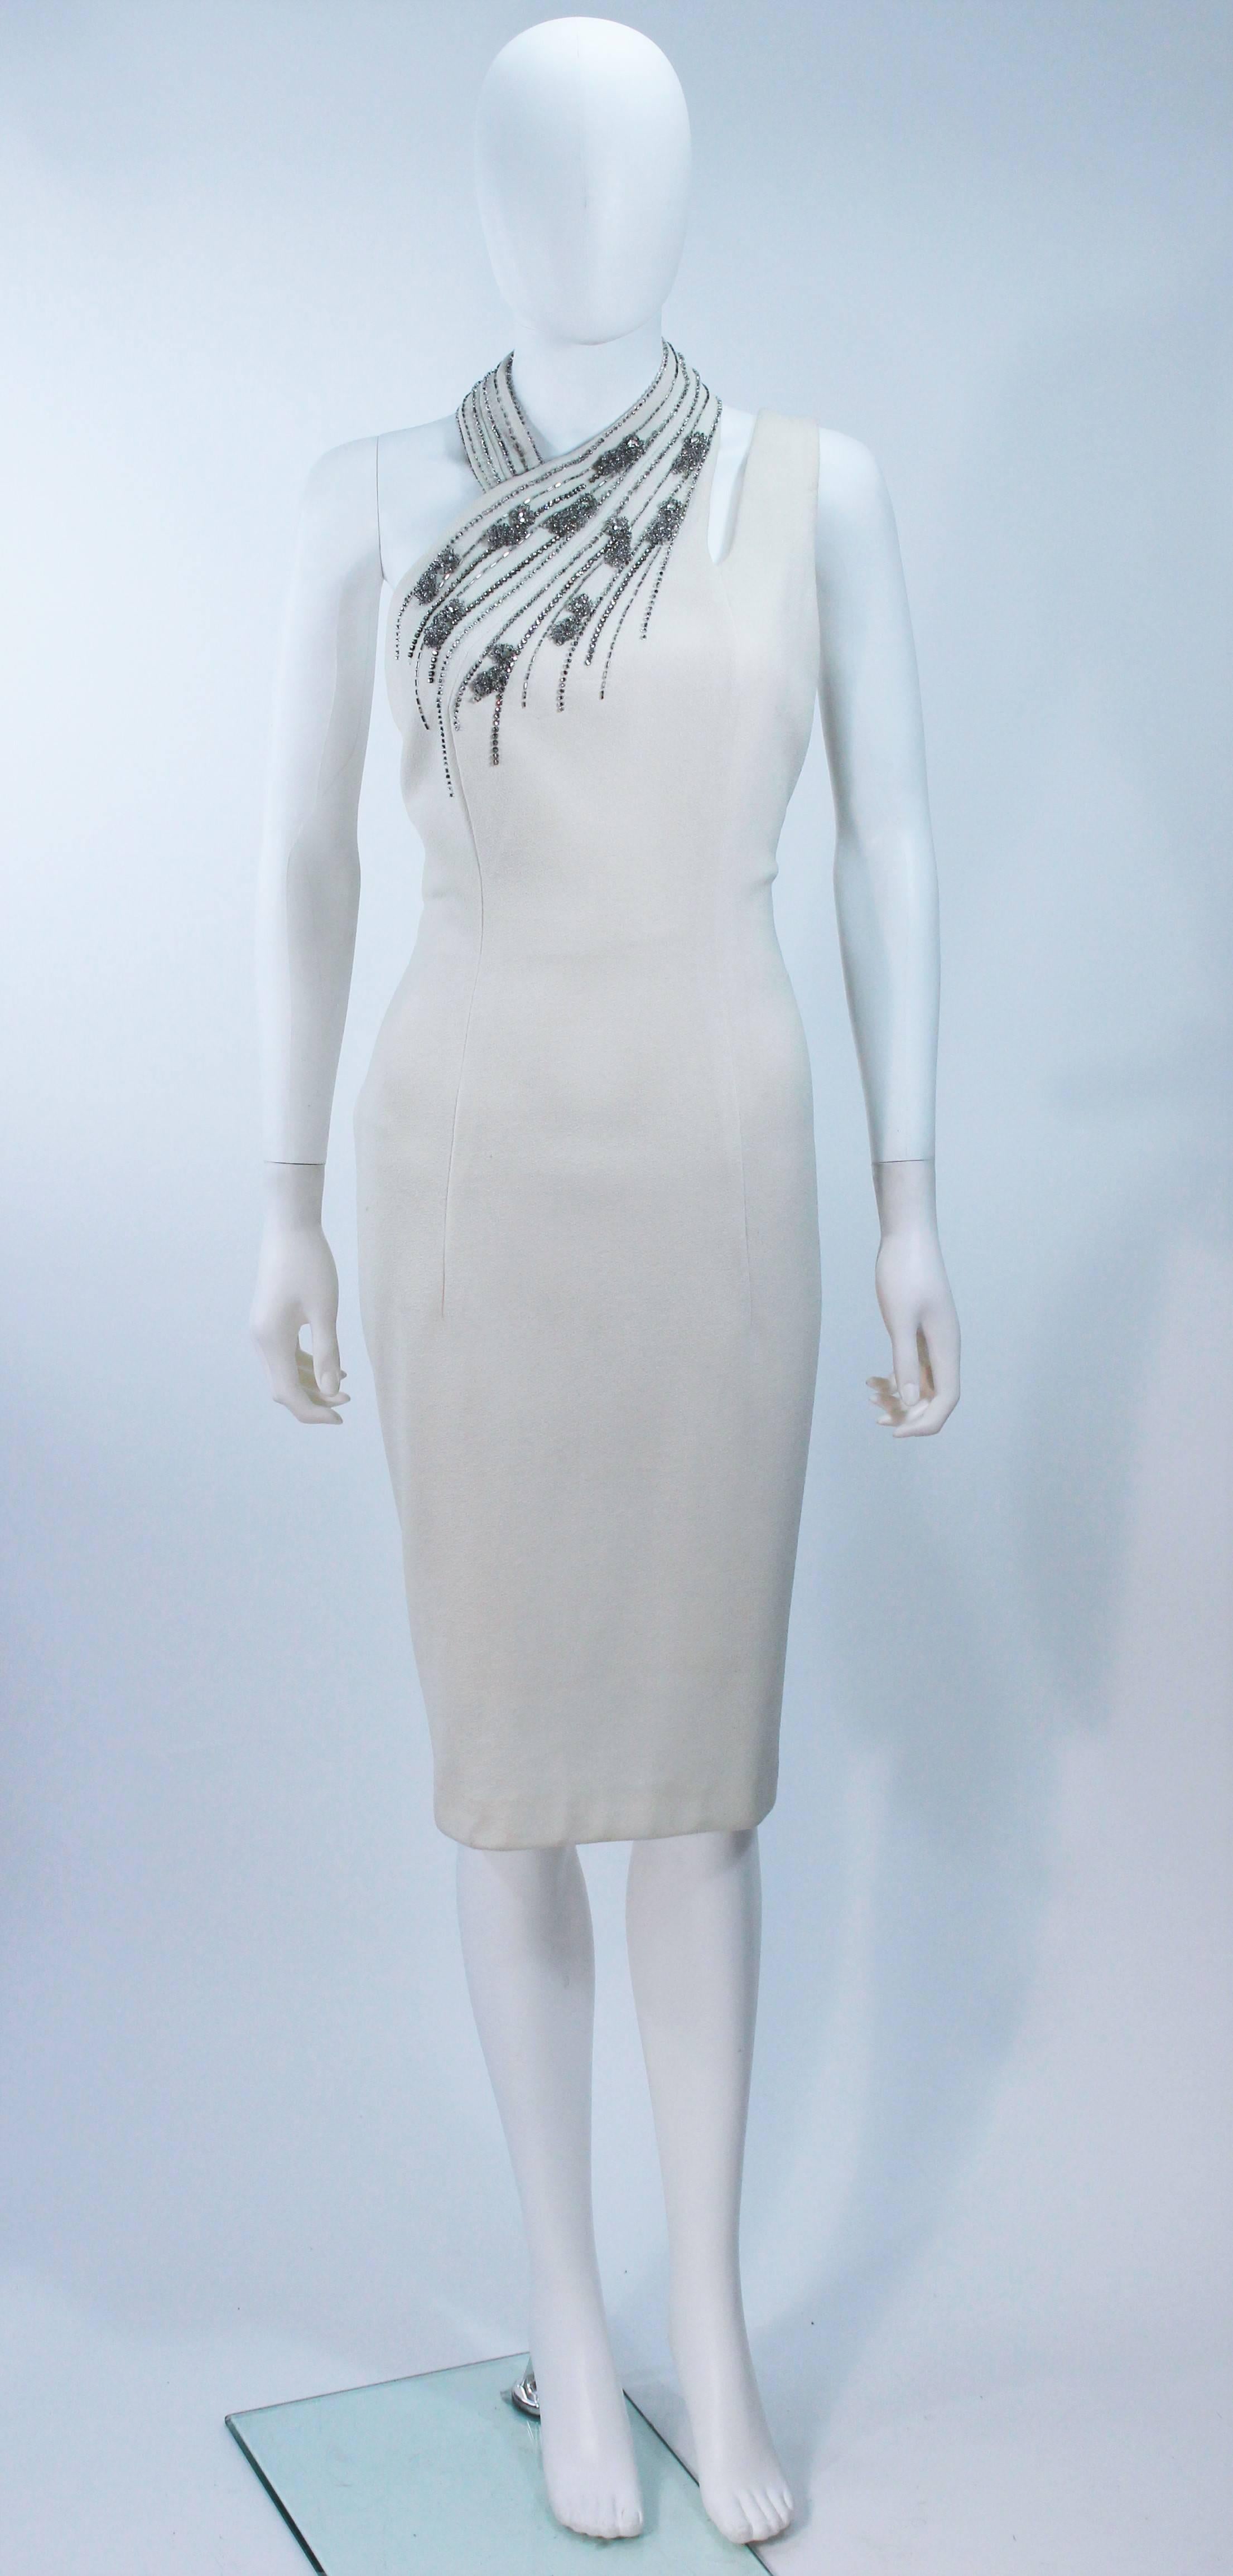  This vintage Sydney North cocktail dress is composed of a white crepe and features an asymmetrical halter design. There is a center back zipper closure. In excellent vintage condition. 

**Please cross-reference measurements for personal